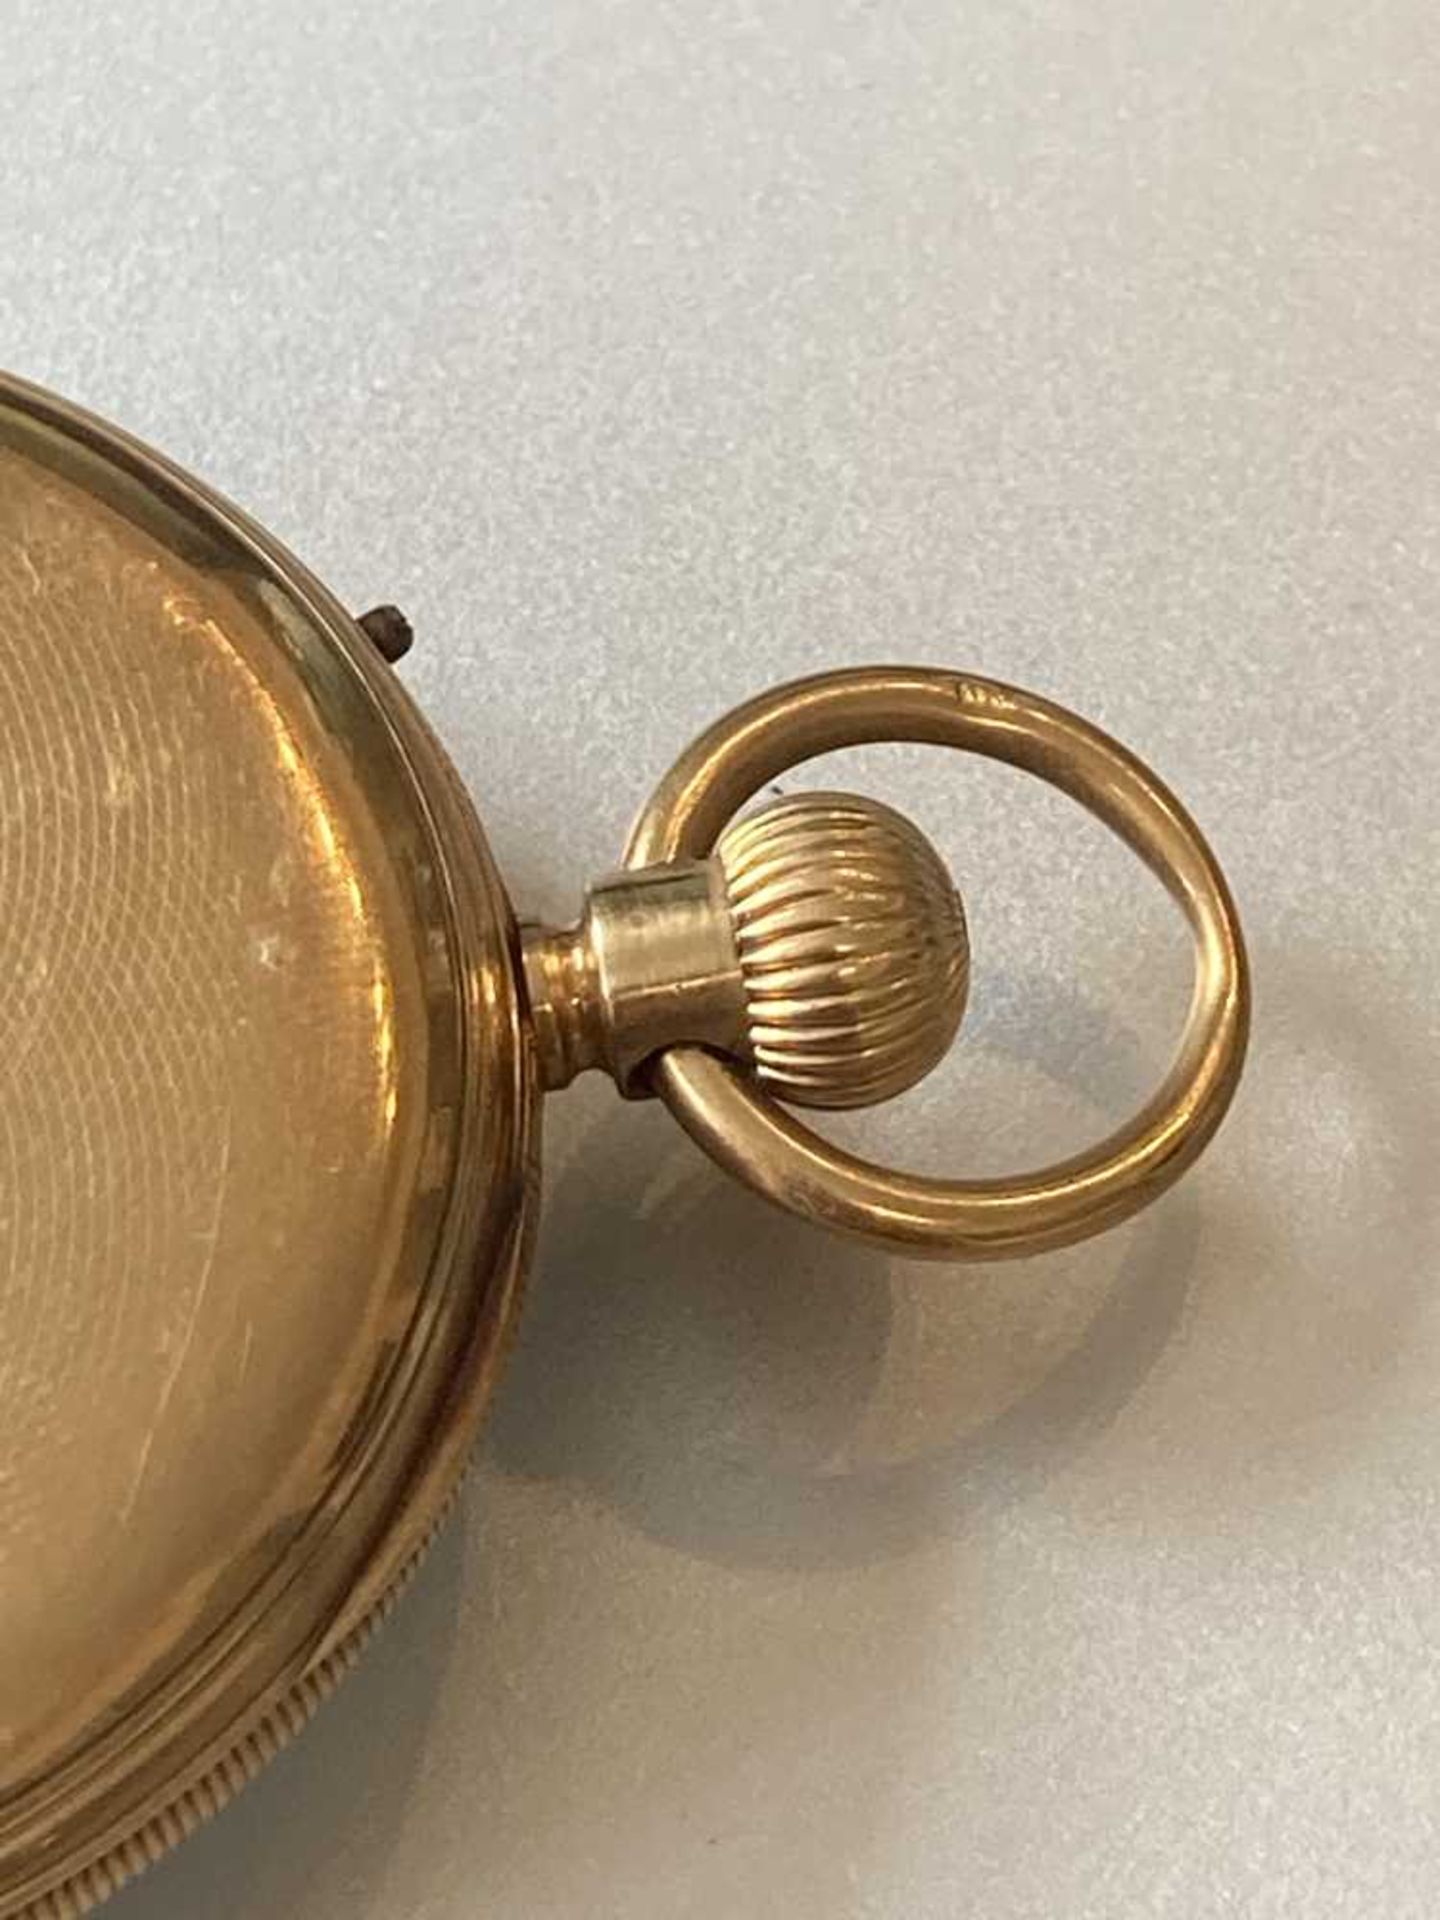 A 19th century gold pocket watch - Image 8 of 9